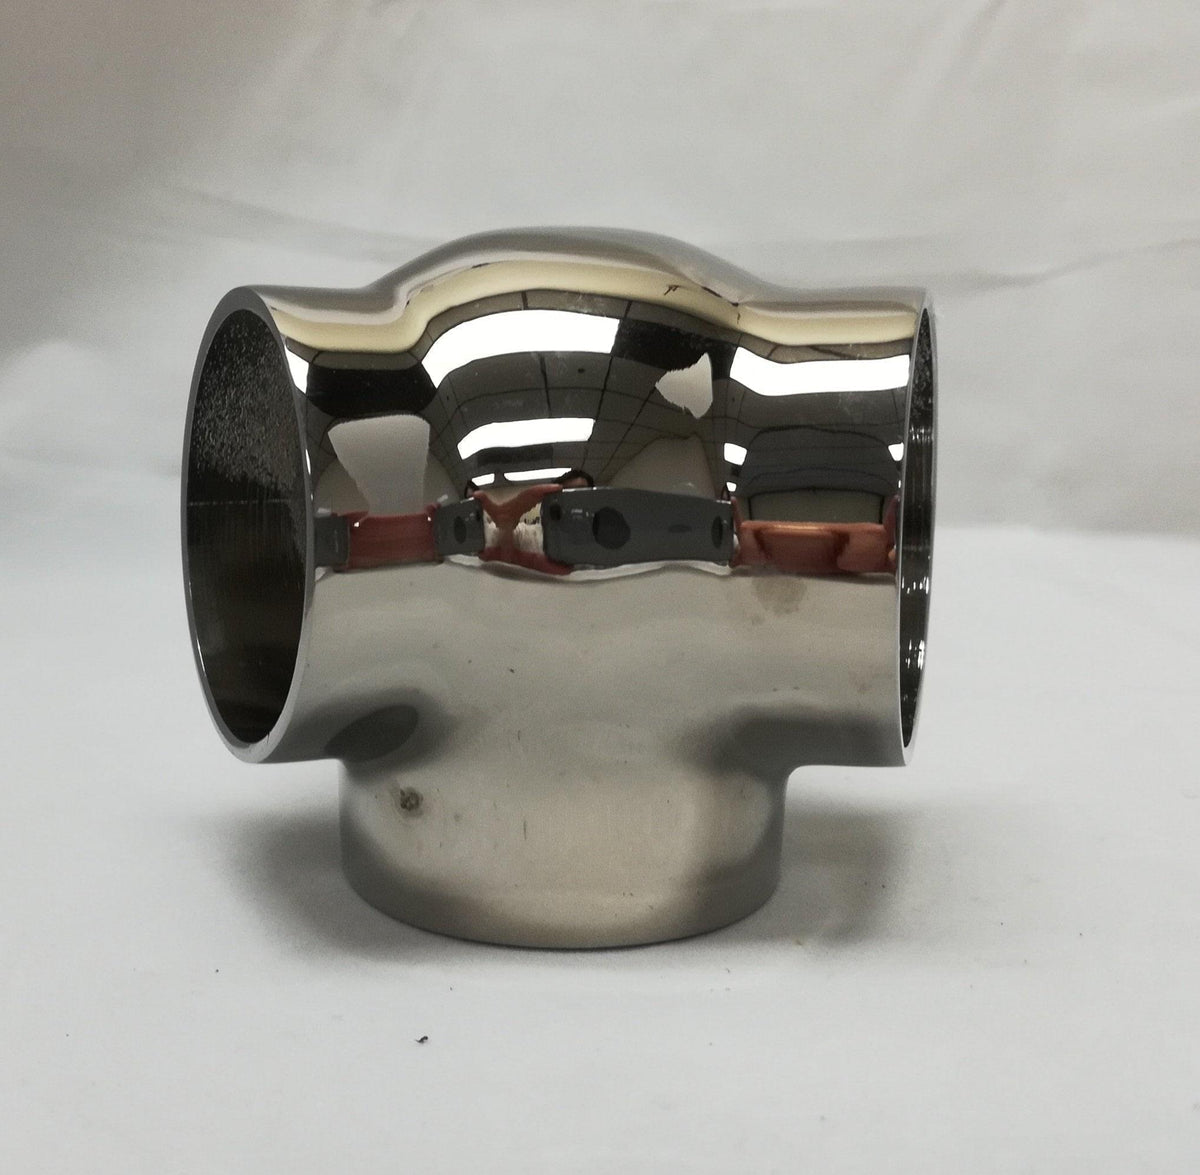 135° Ball Side Outlet Elbow for 1-1/2" Tubing Ball Fittings, Components for 1-1/2" Od TubingTrade Diversified